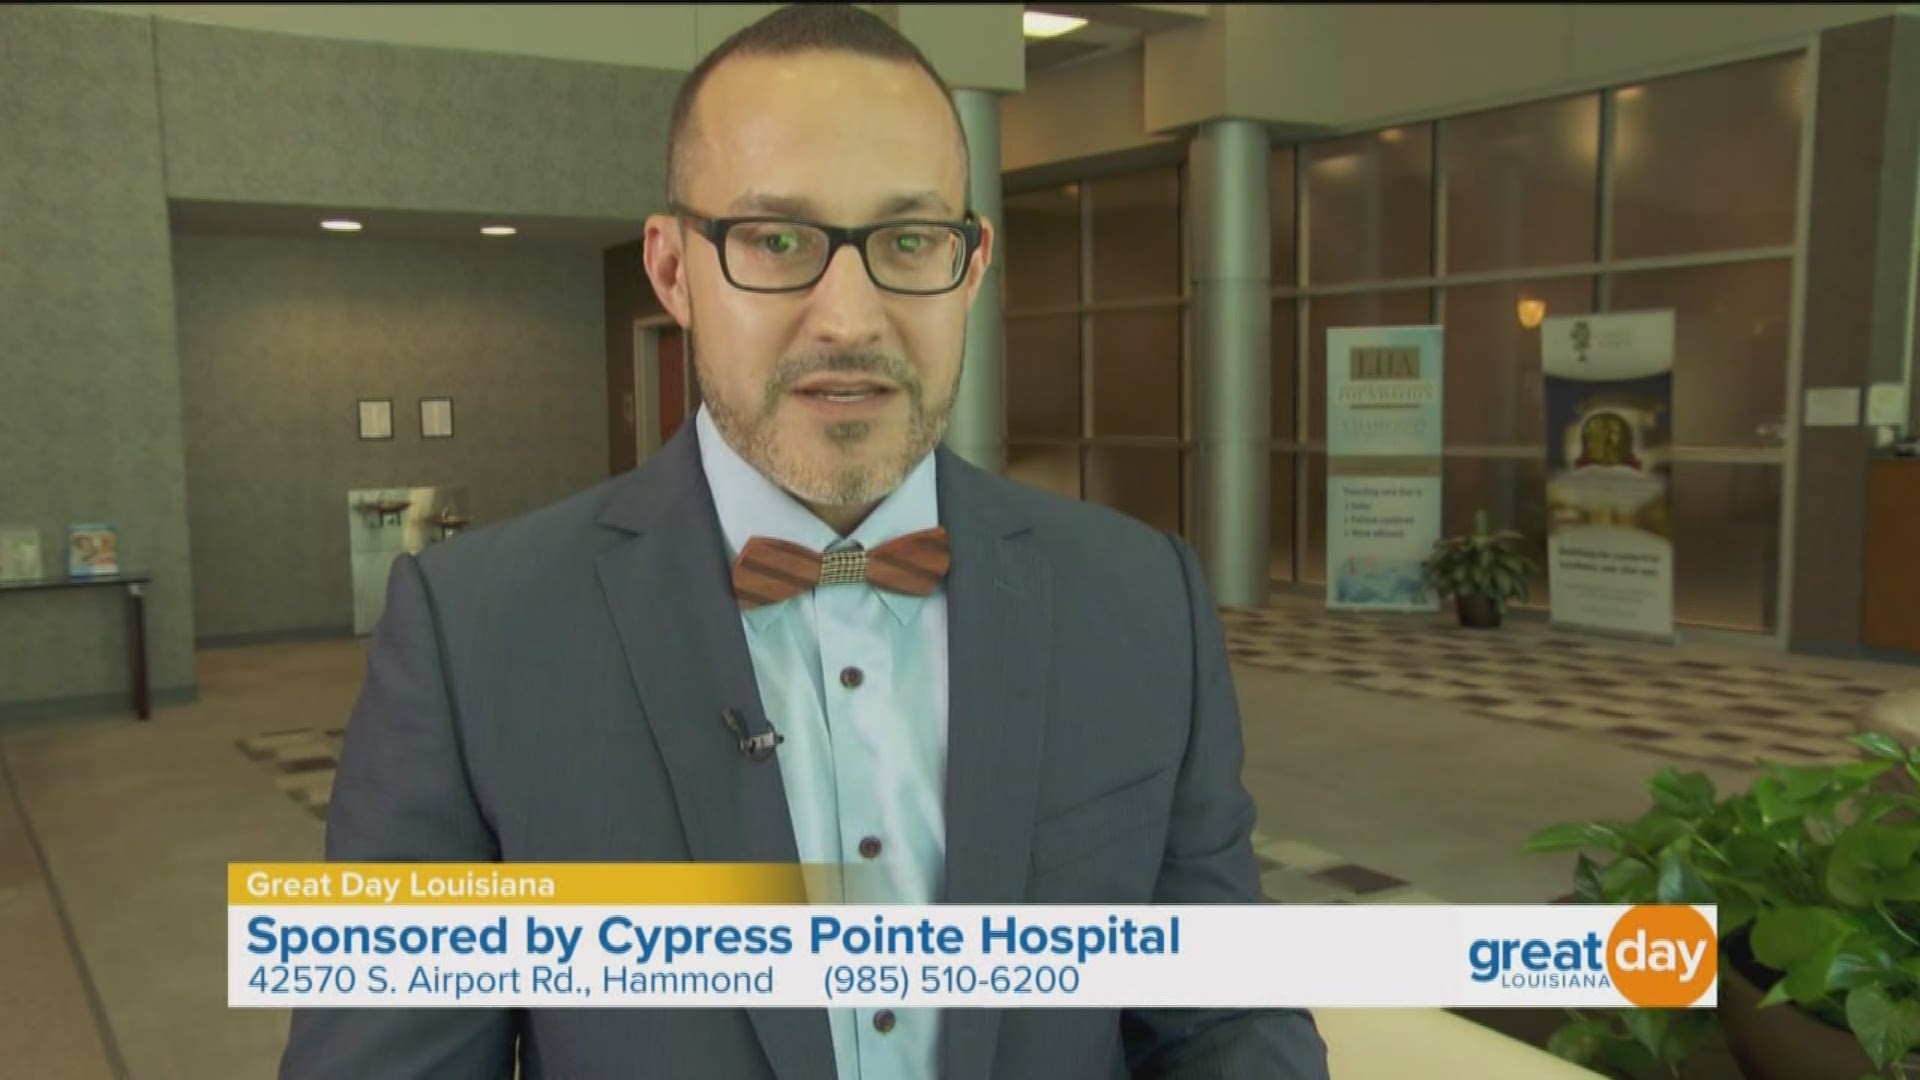 Cypress Pointe Hospital in Hammond is America's last physician-owned hospital, and here to tell us what value that provides to patients is Dr. Chad Domangue.